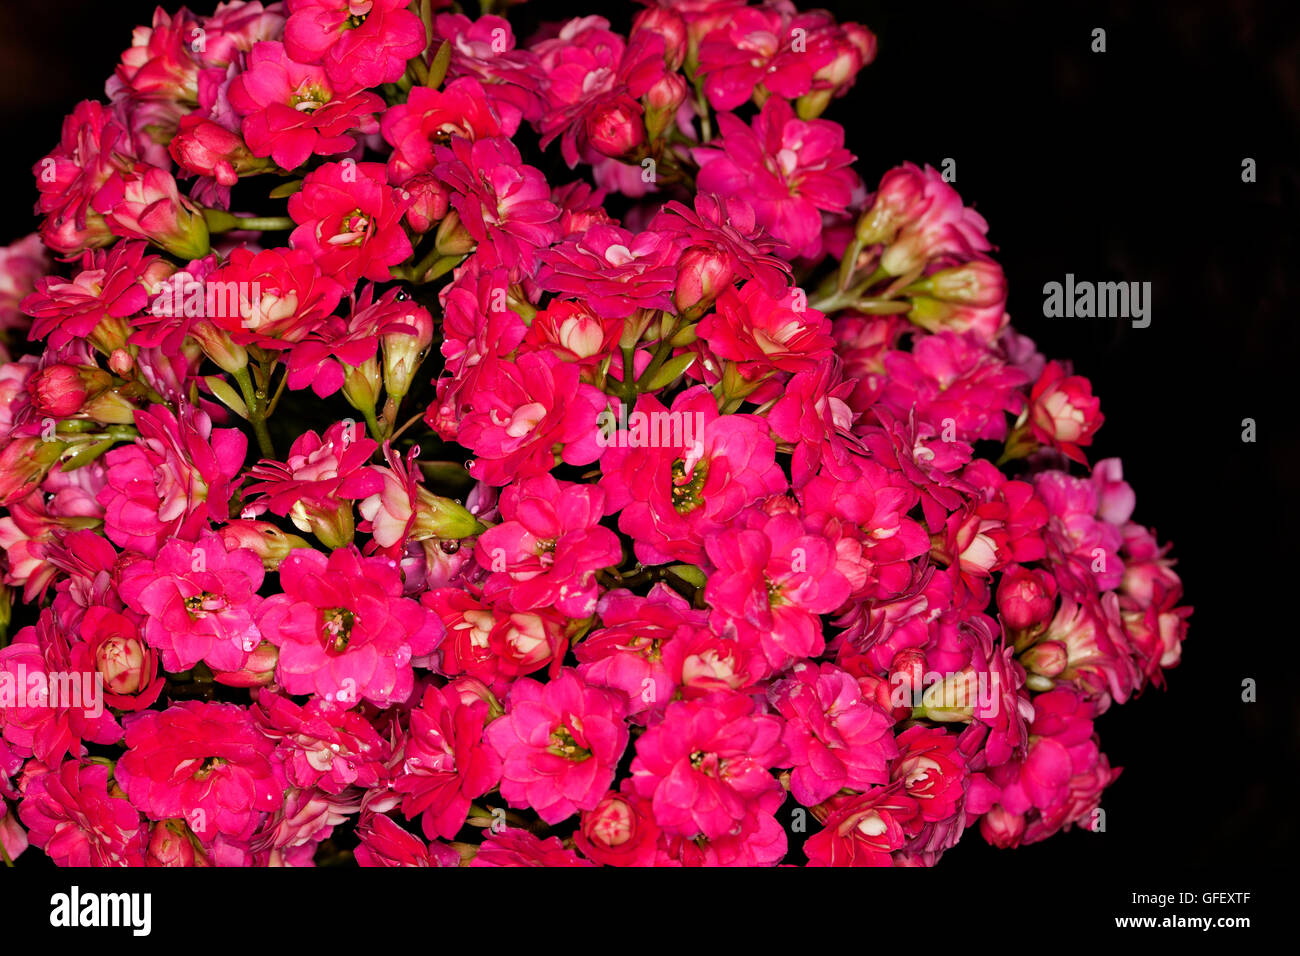 Close-up of dense cluster of vivid double red / pink flowers of succulent plant Kalanchoe blossfeldiana hybrid on drk background Stock Photo